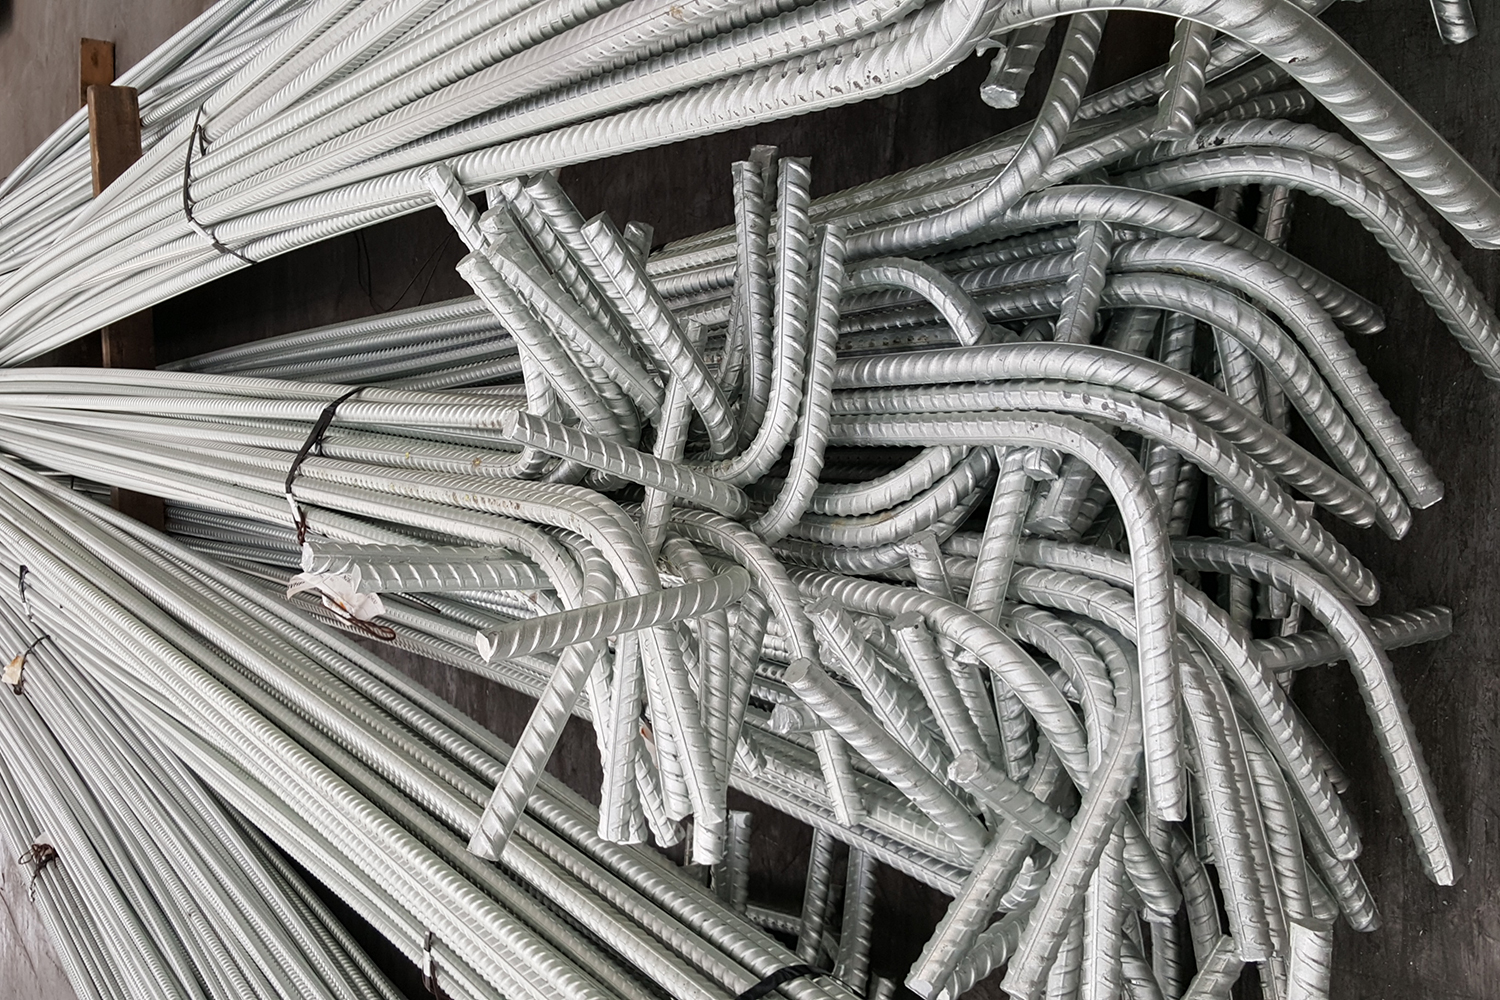 Hot dip galvanized reinforcement for increased durability in concrete construction.